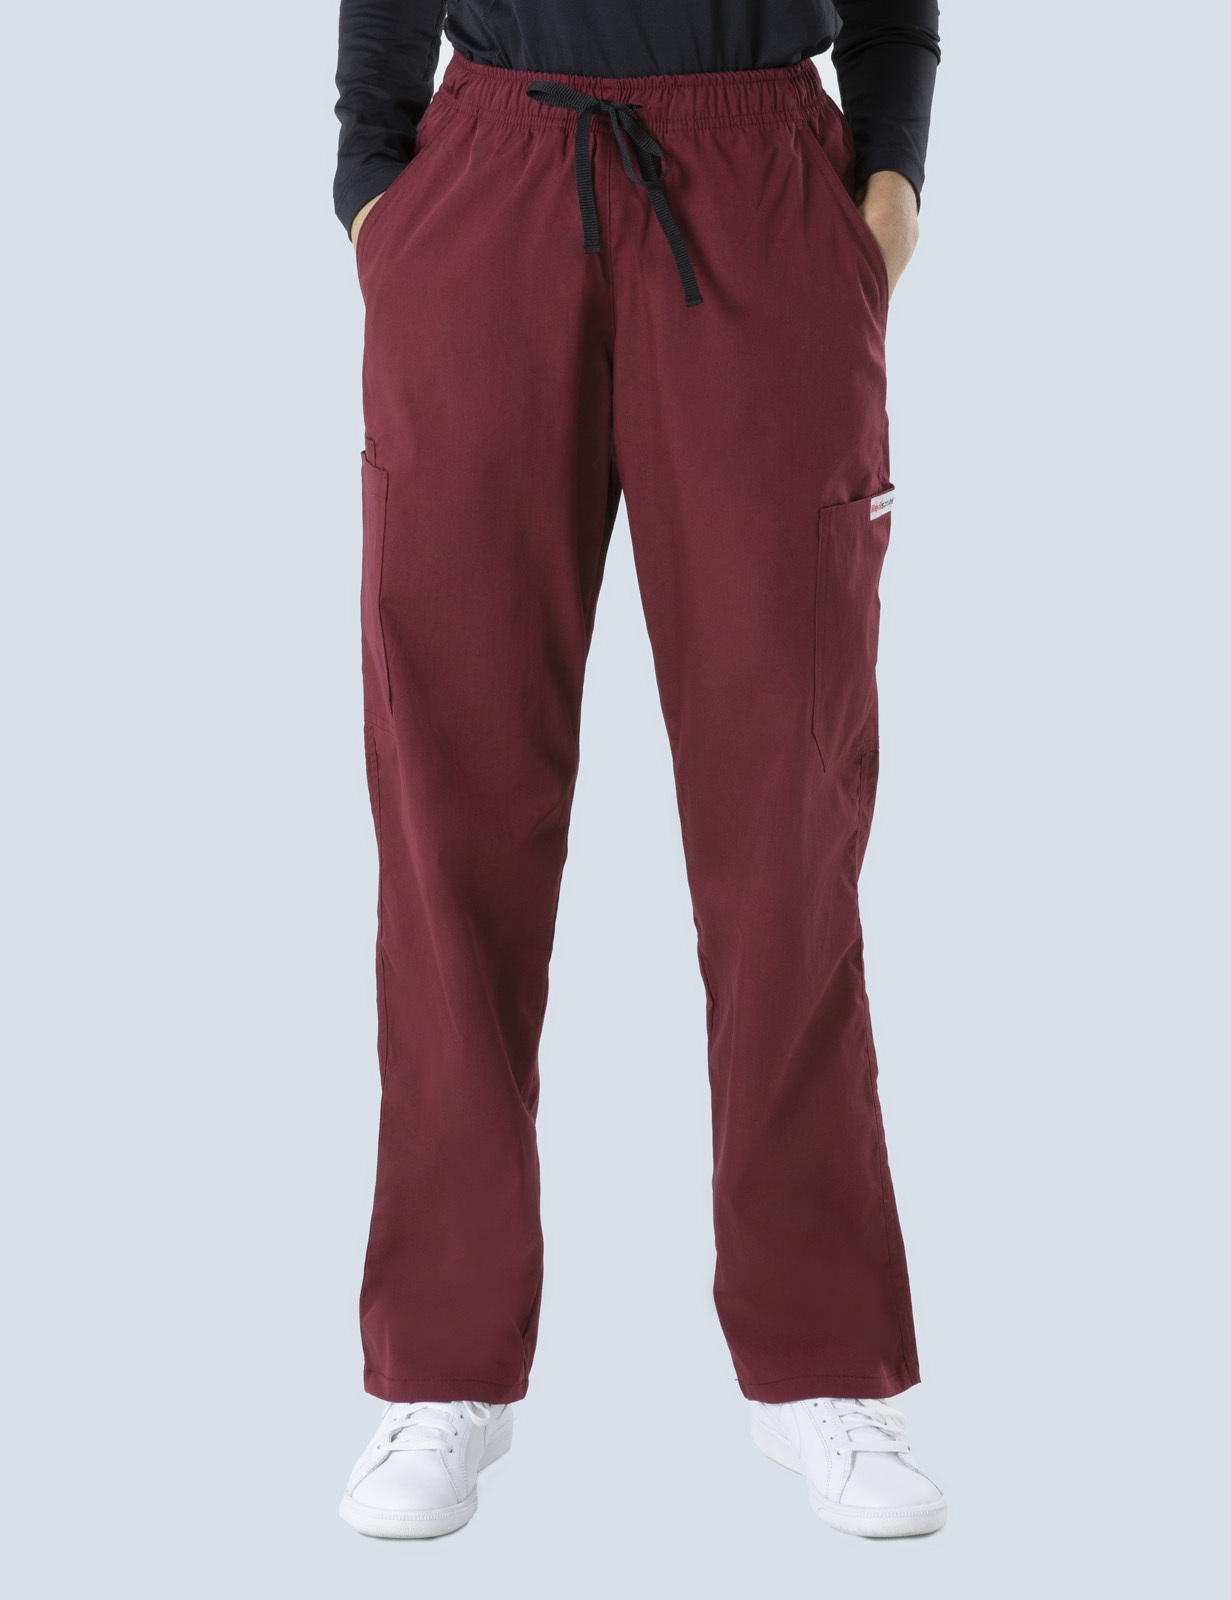 Innisfail Hospital - ED RN (Women's Fit Solid Scrub Top and Cargo Pants in Burgundy incl Logos)